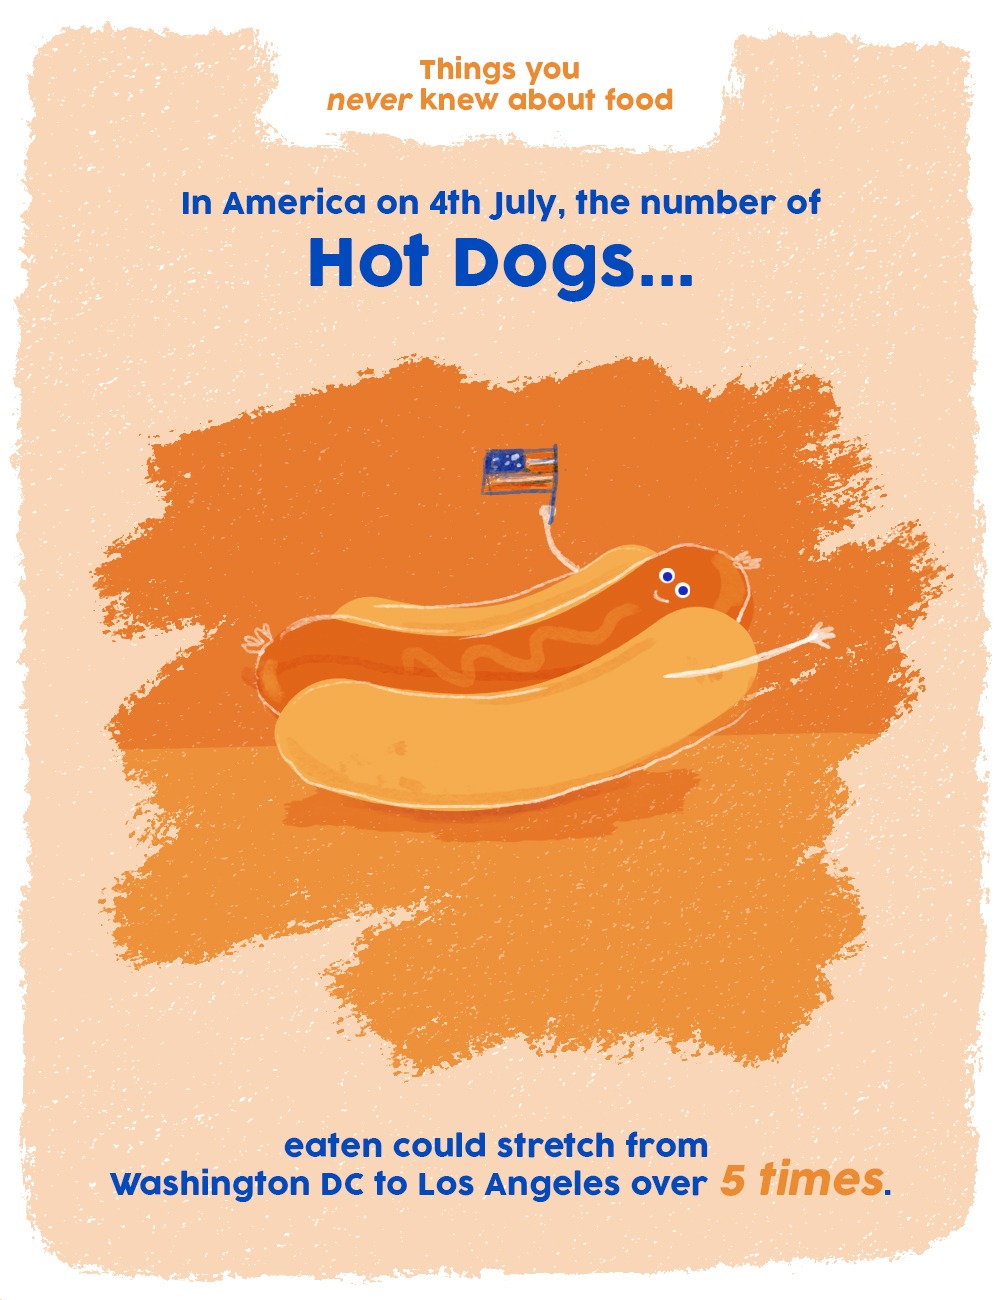 things you never knew about food graphics - hot dogs facts